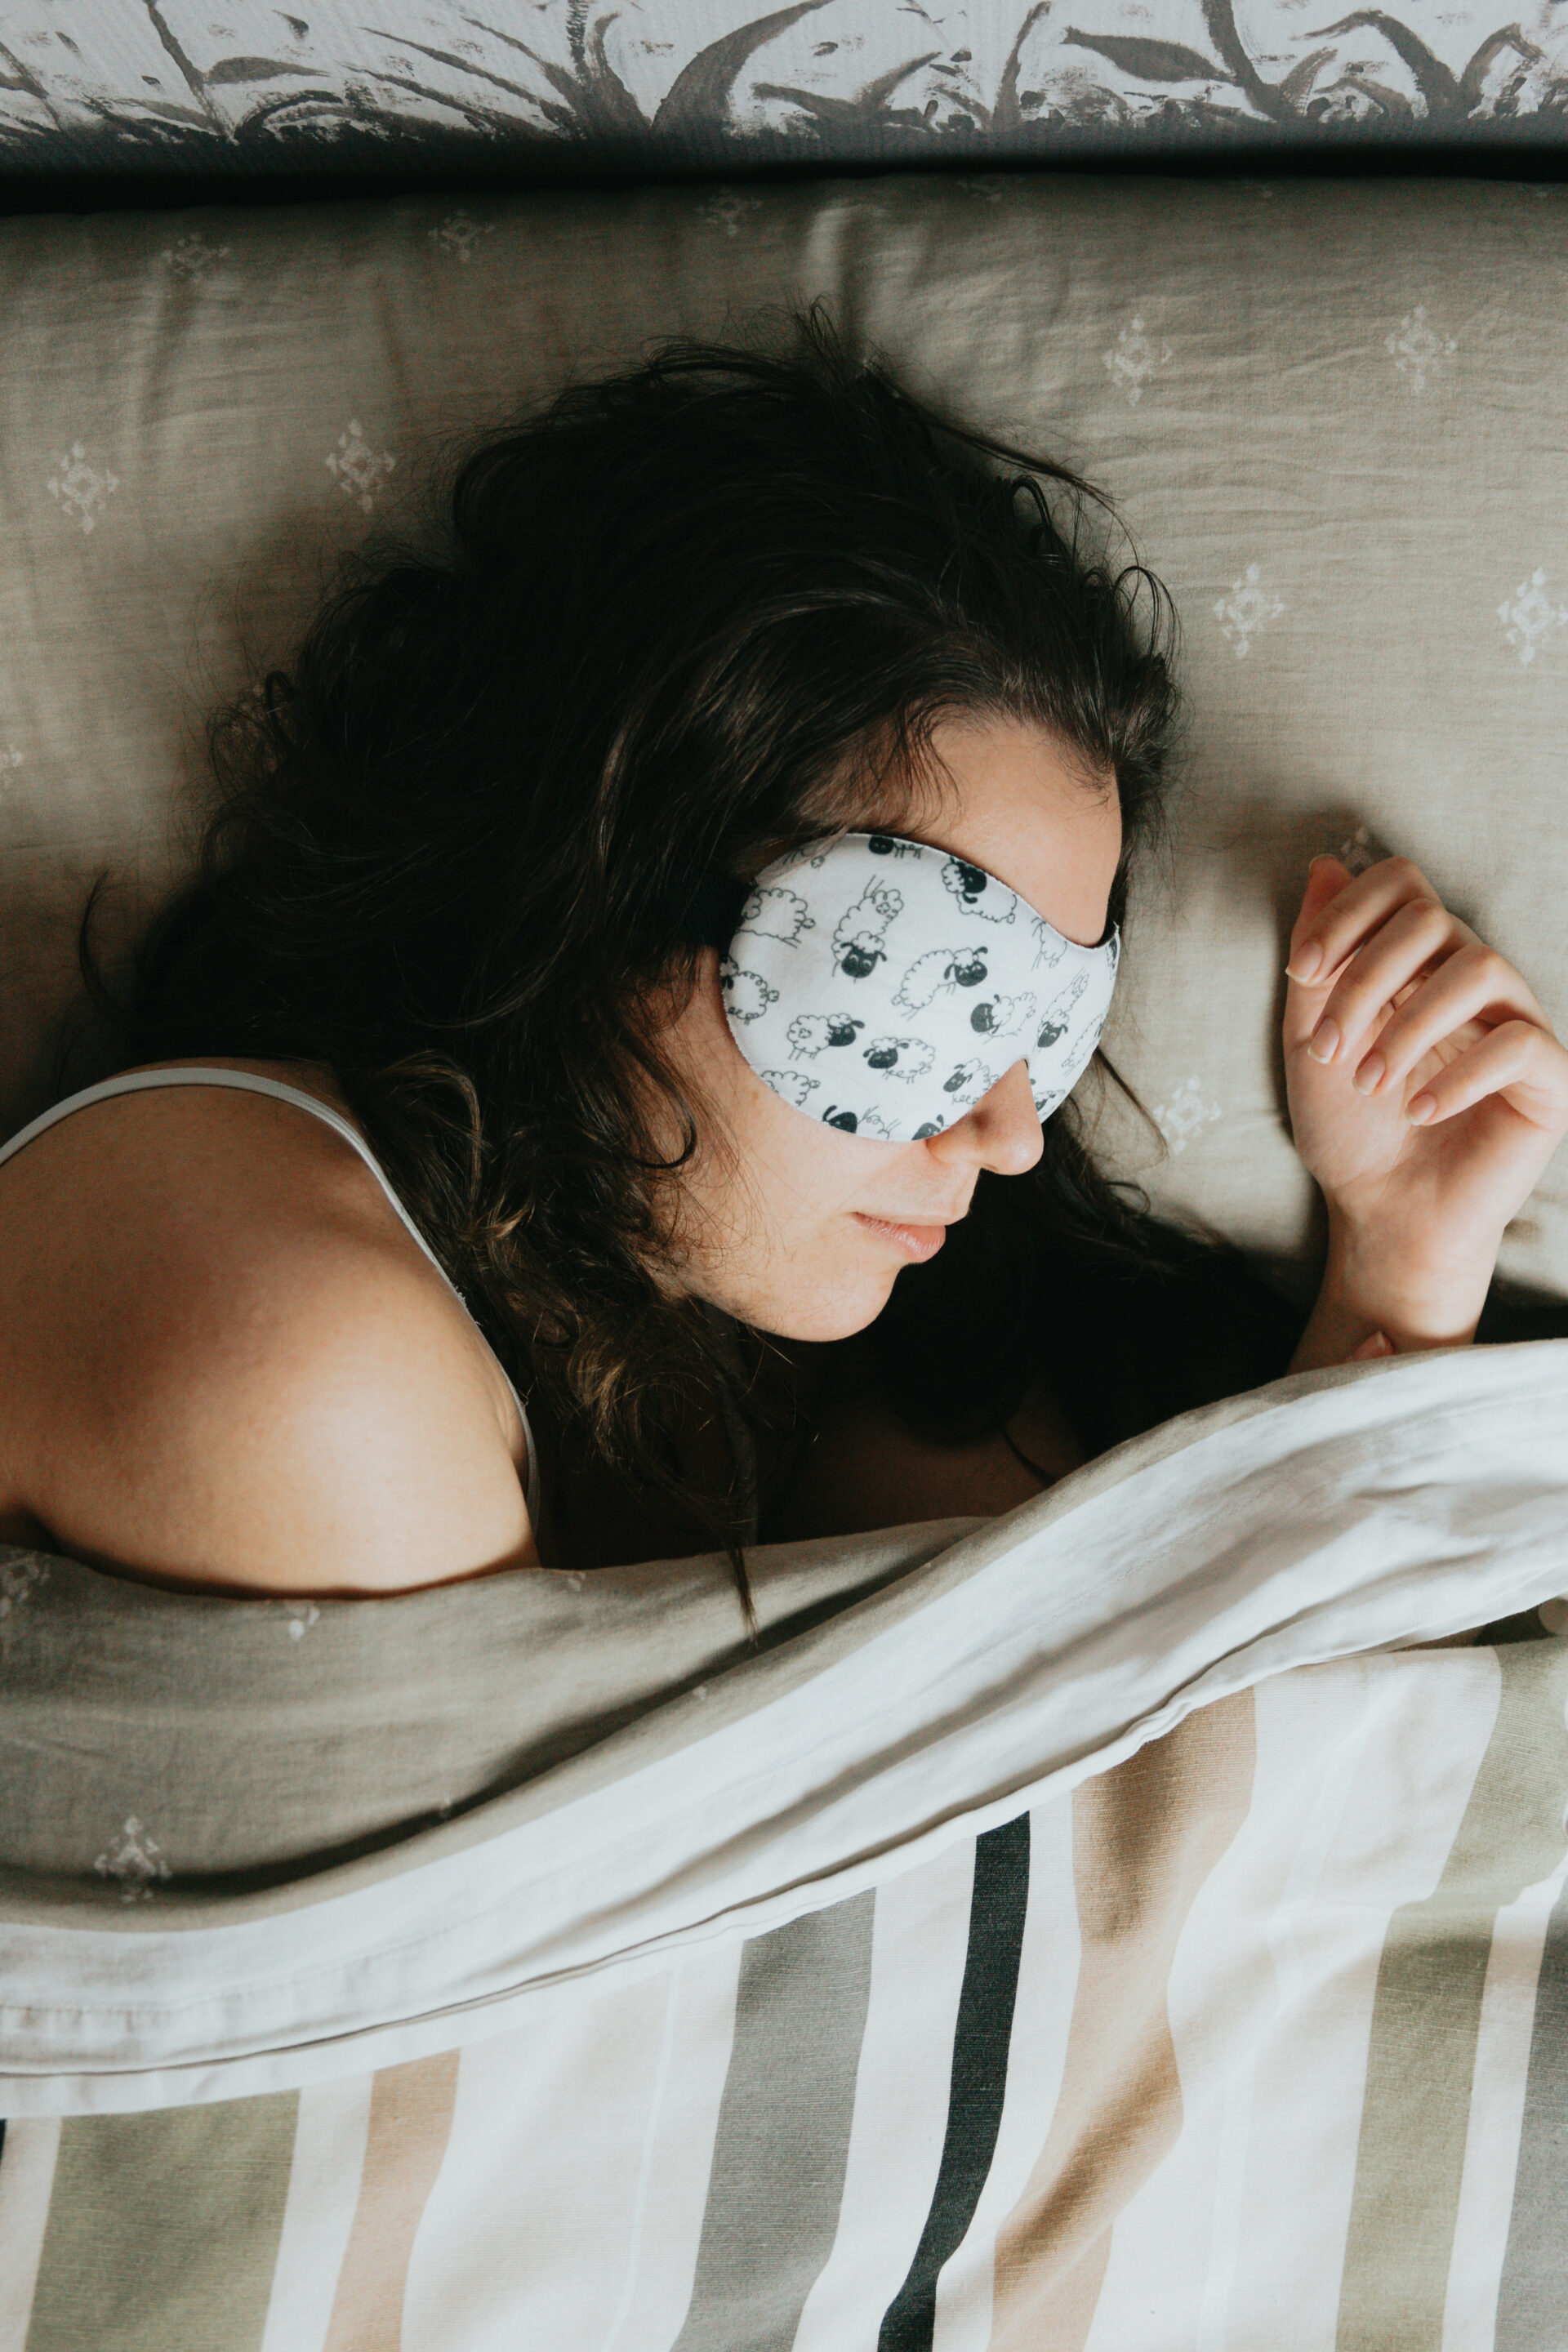 7 Easy Ways to Reduce Anxiety and Get Better Sleep Tonight